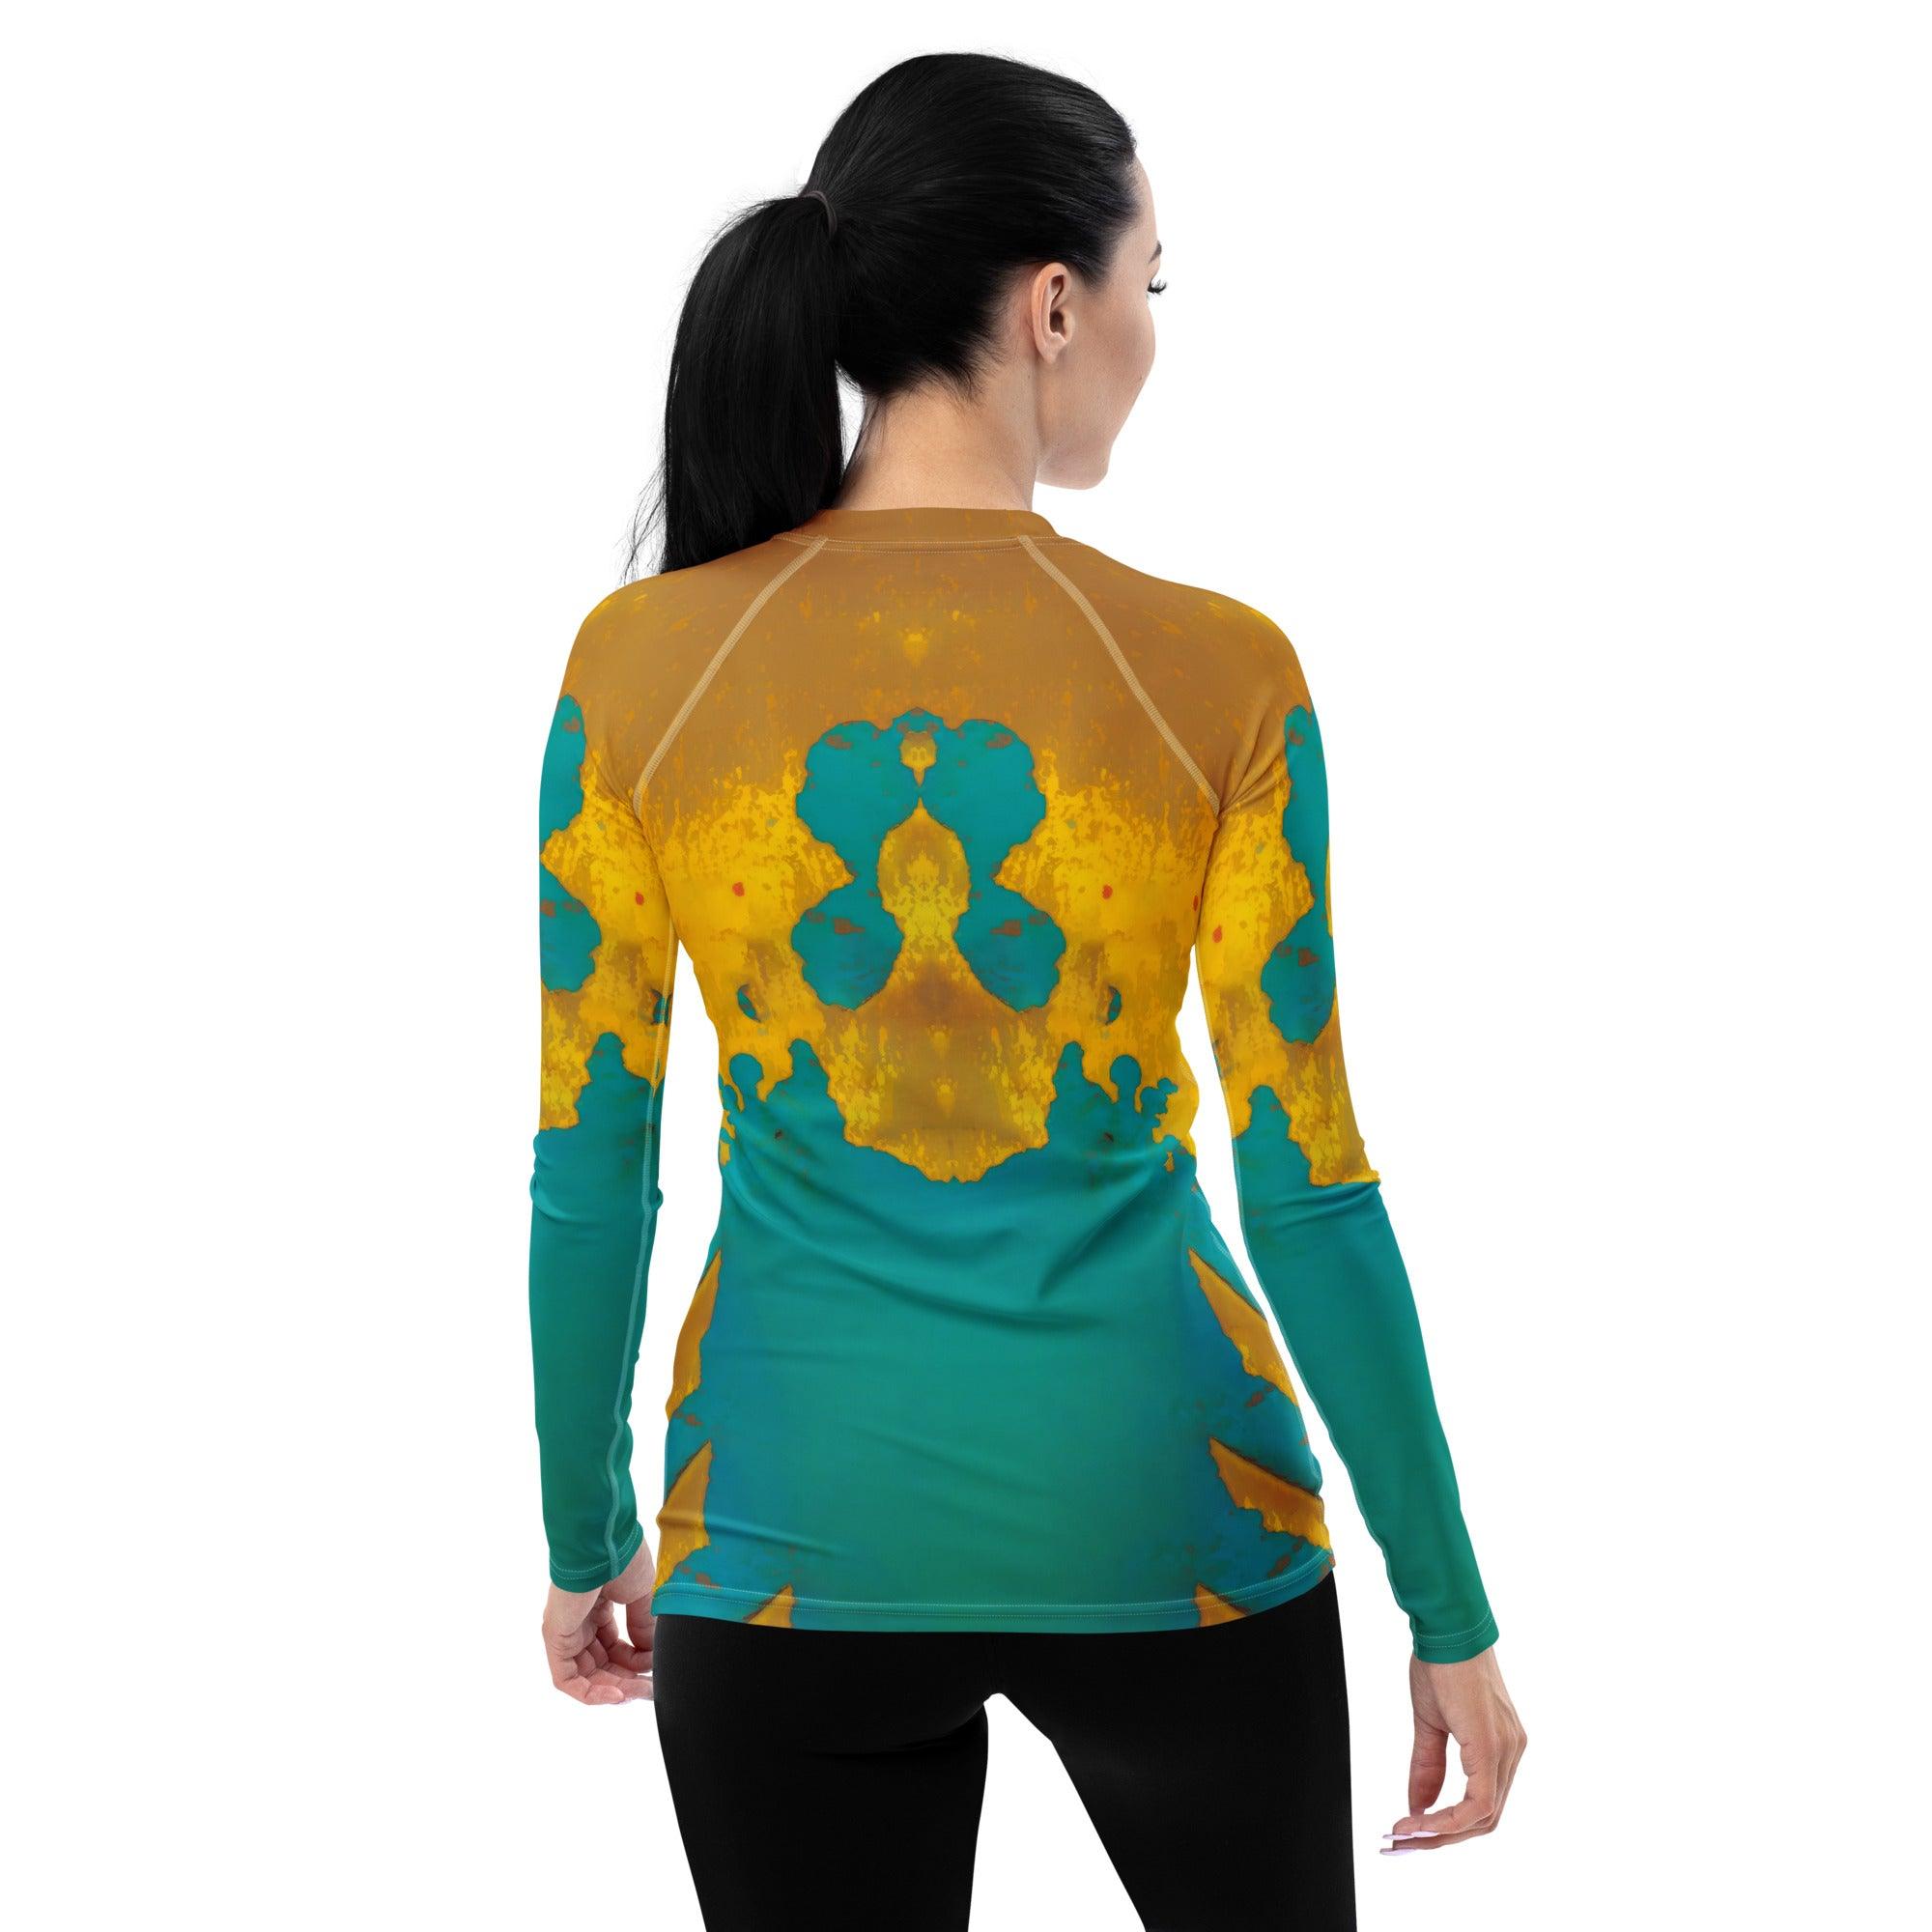 Close-up of the NS-810 Women's Rash Guard material and texture.